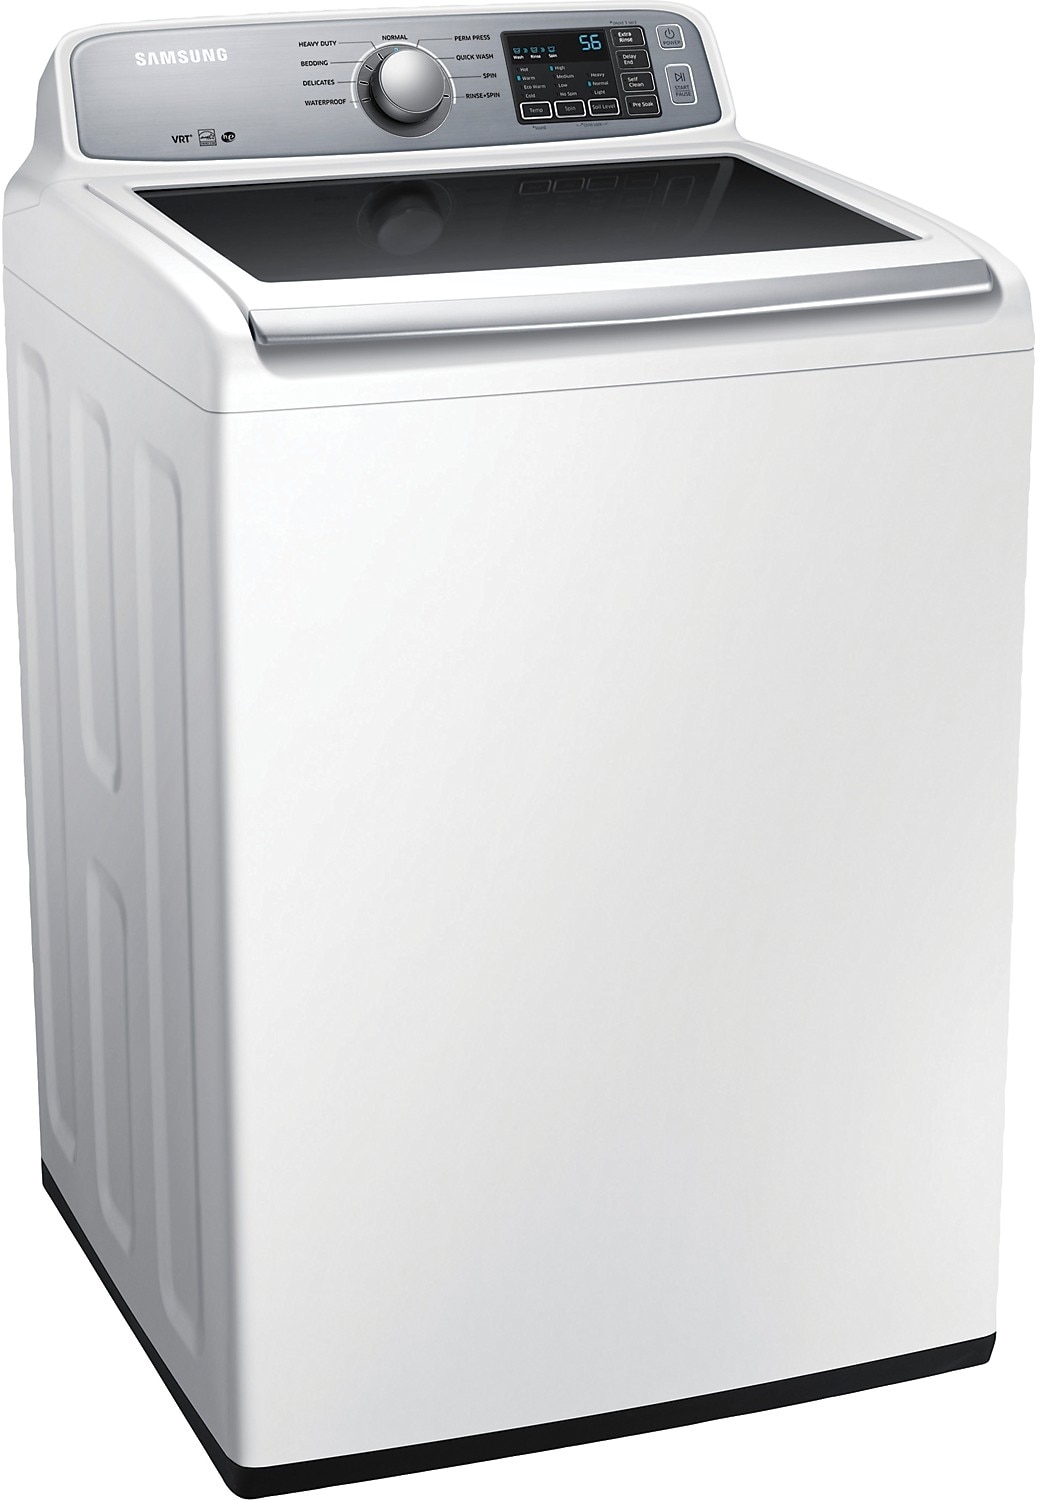 Samsung 5.2 Cu. Ft. Large Capacity TopLoad Washer White The Brick